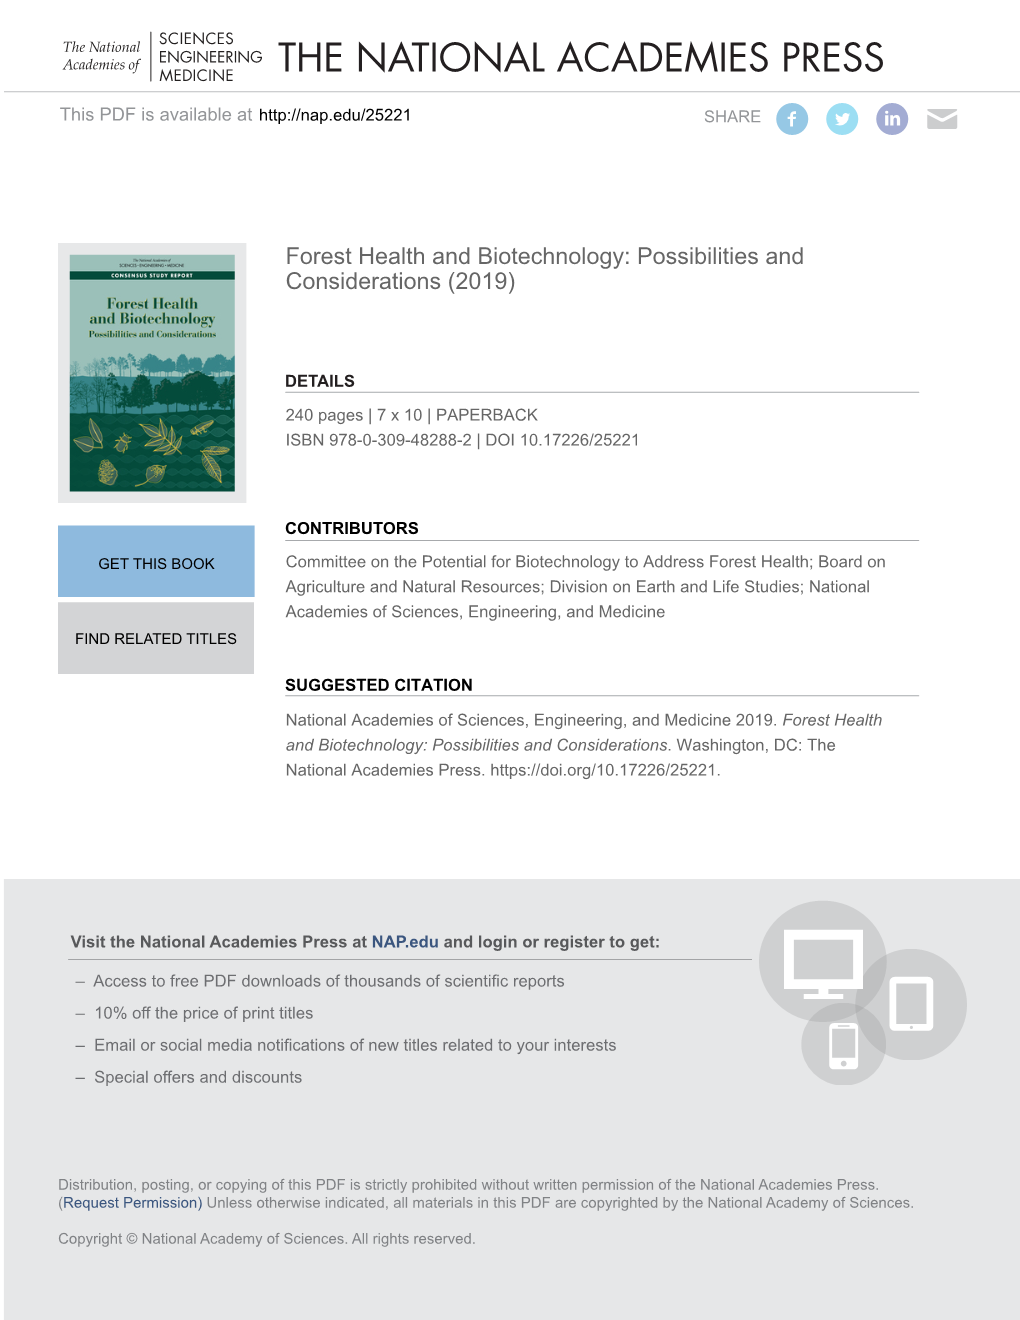 Forest Health and Biotechnology: Possibilities and Considerations (2019)